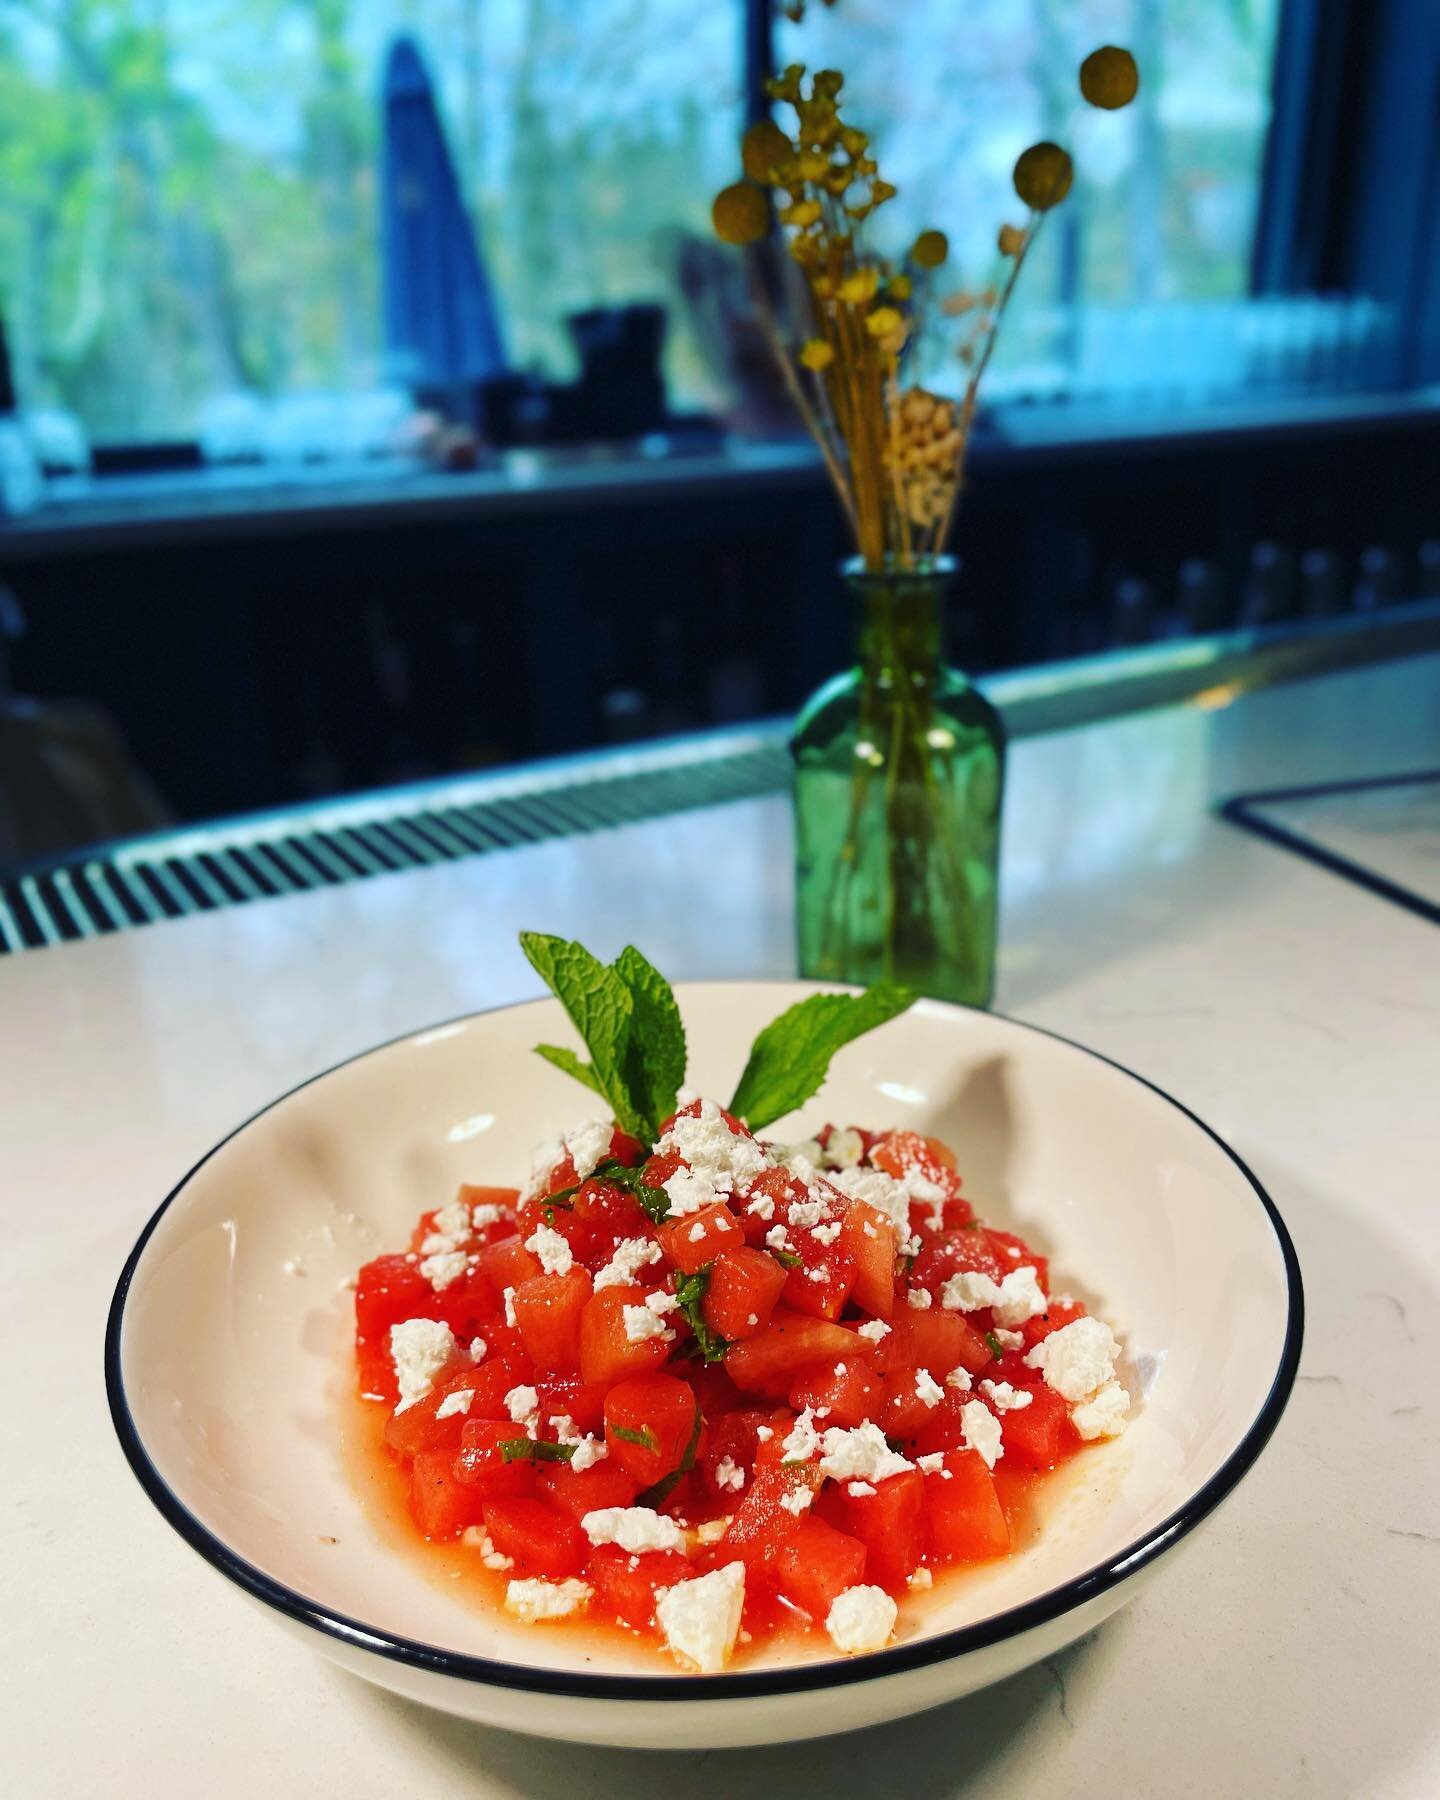 Summer is almost here and that means new menu items. Say hello to your Watermelon Salad. 

Chunks of sweet, local watermelon are combined with fresh mint from our garden, Bulgarian sheep's milk feta (or vegan feta) and tossed with our house lemon oli